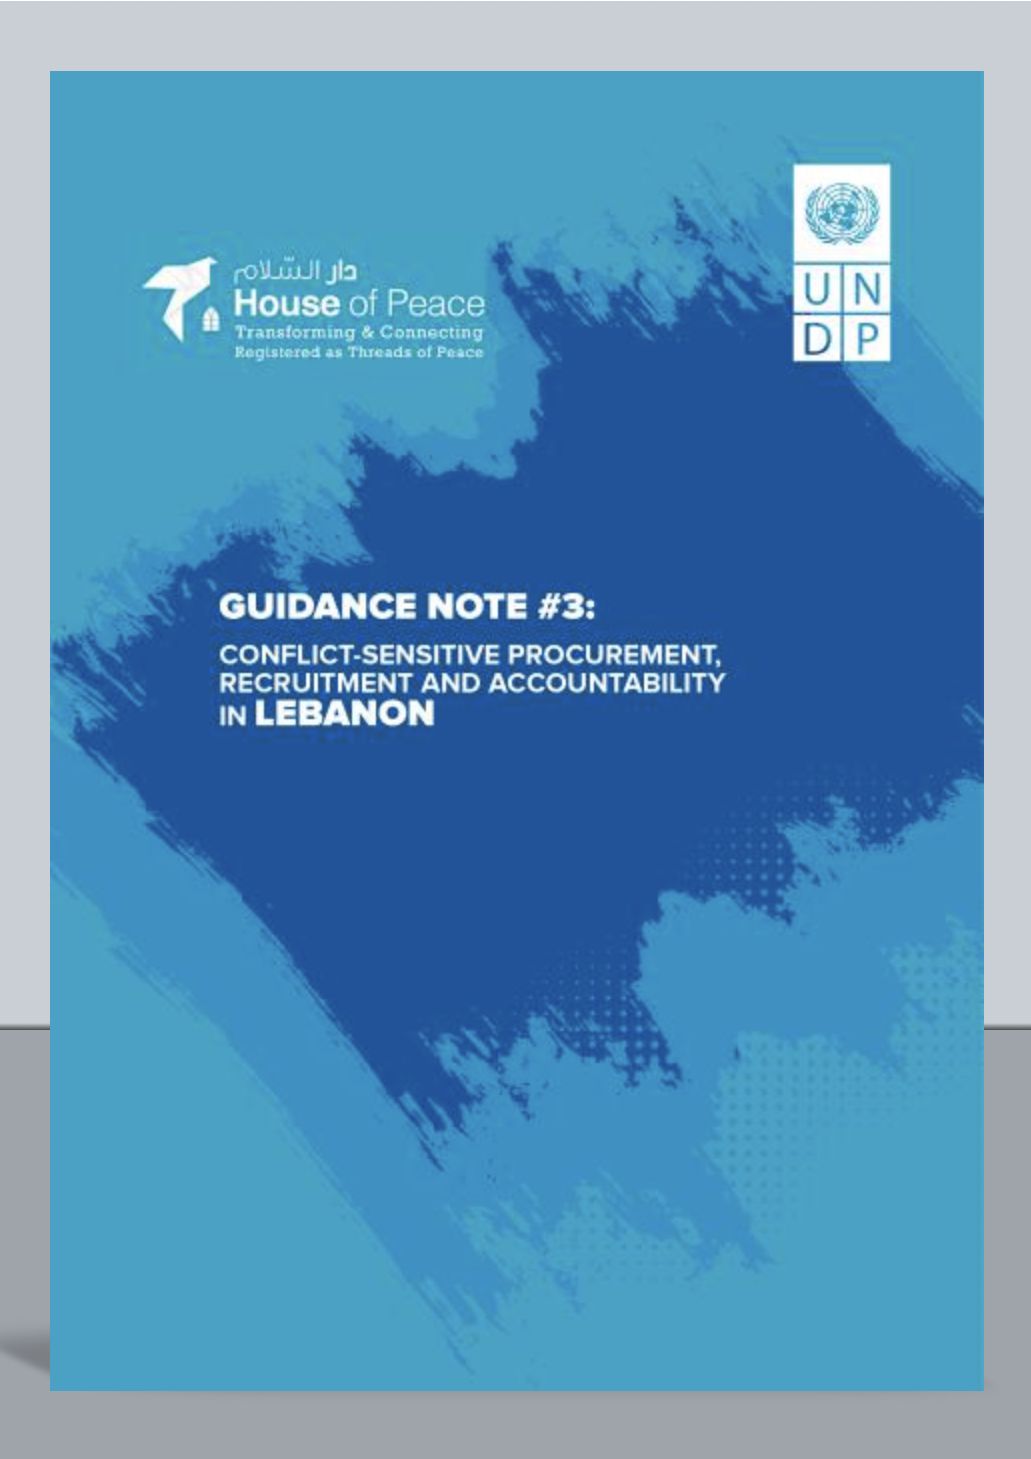 Guidance Note #3: Conflict-Sensitive Procurement Recruitment and Accountability in Lebanon